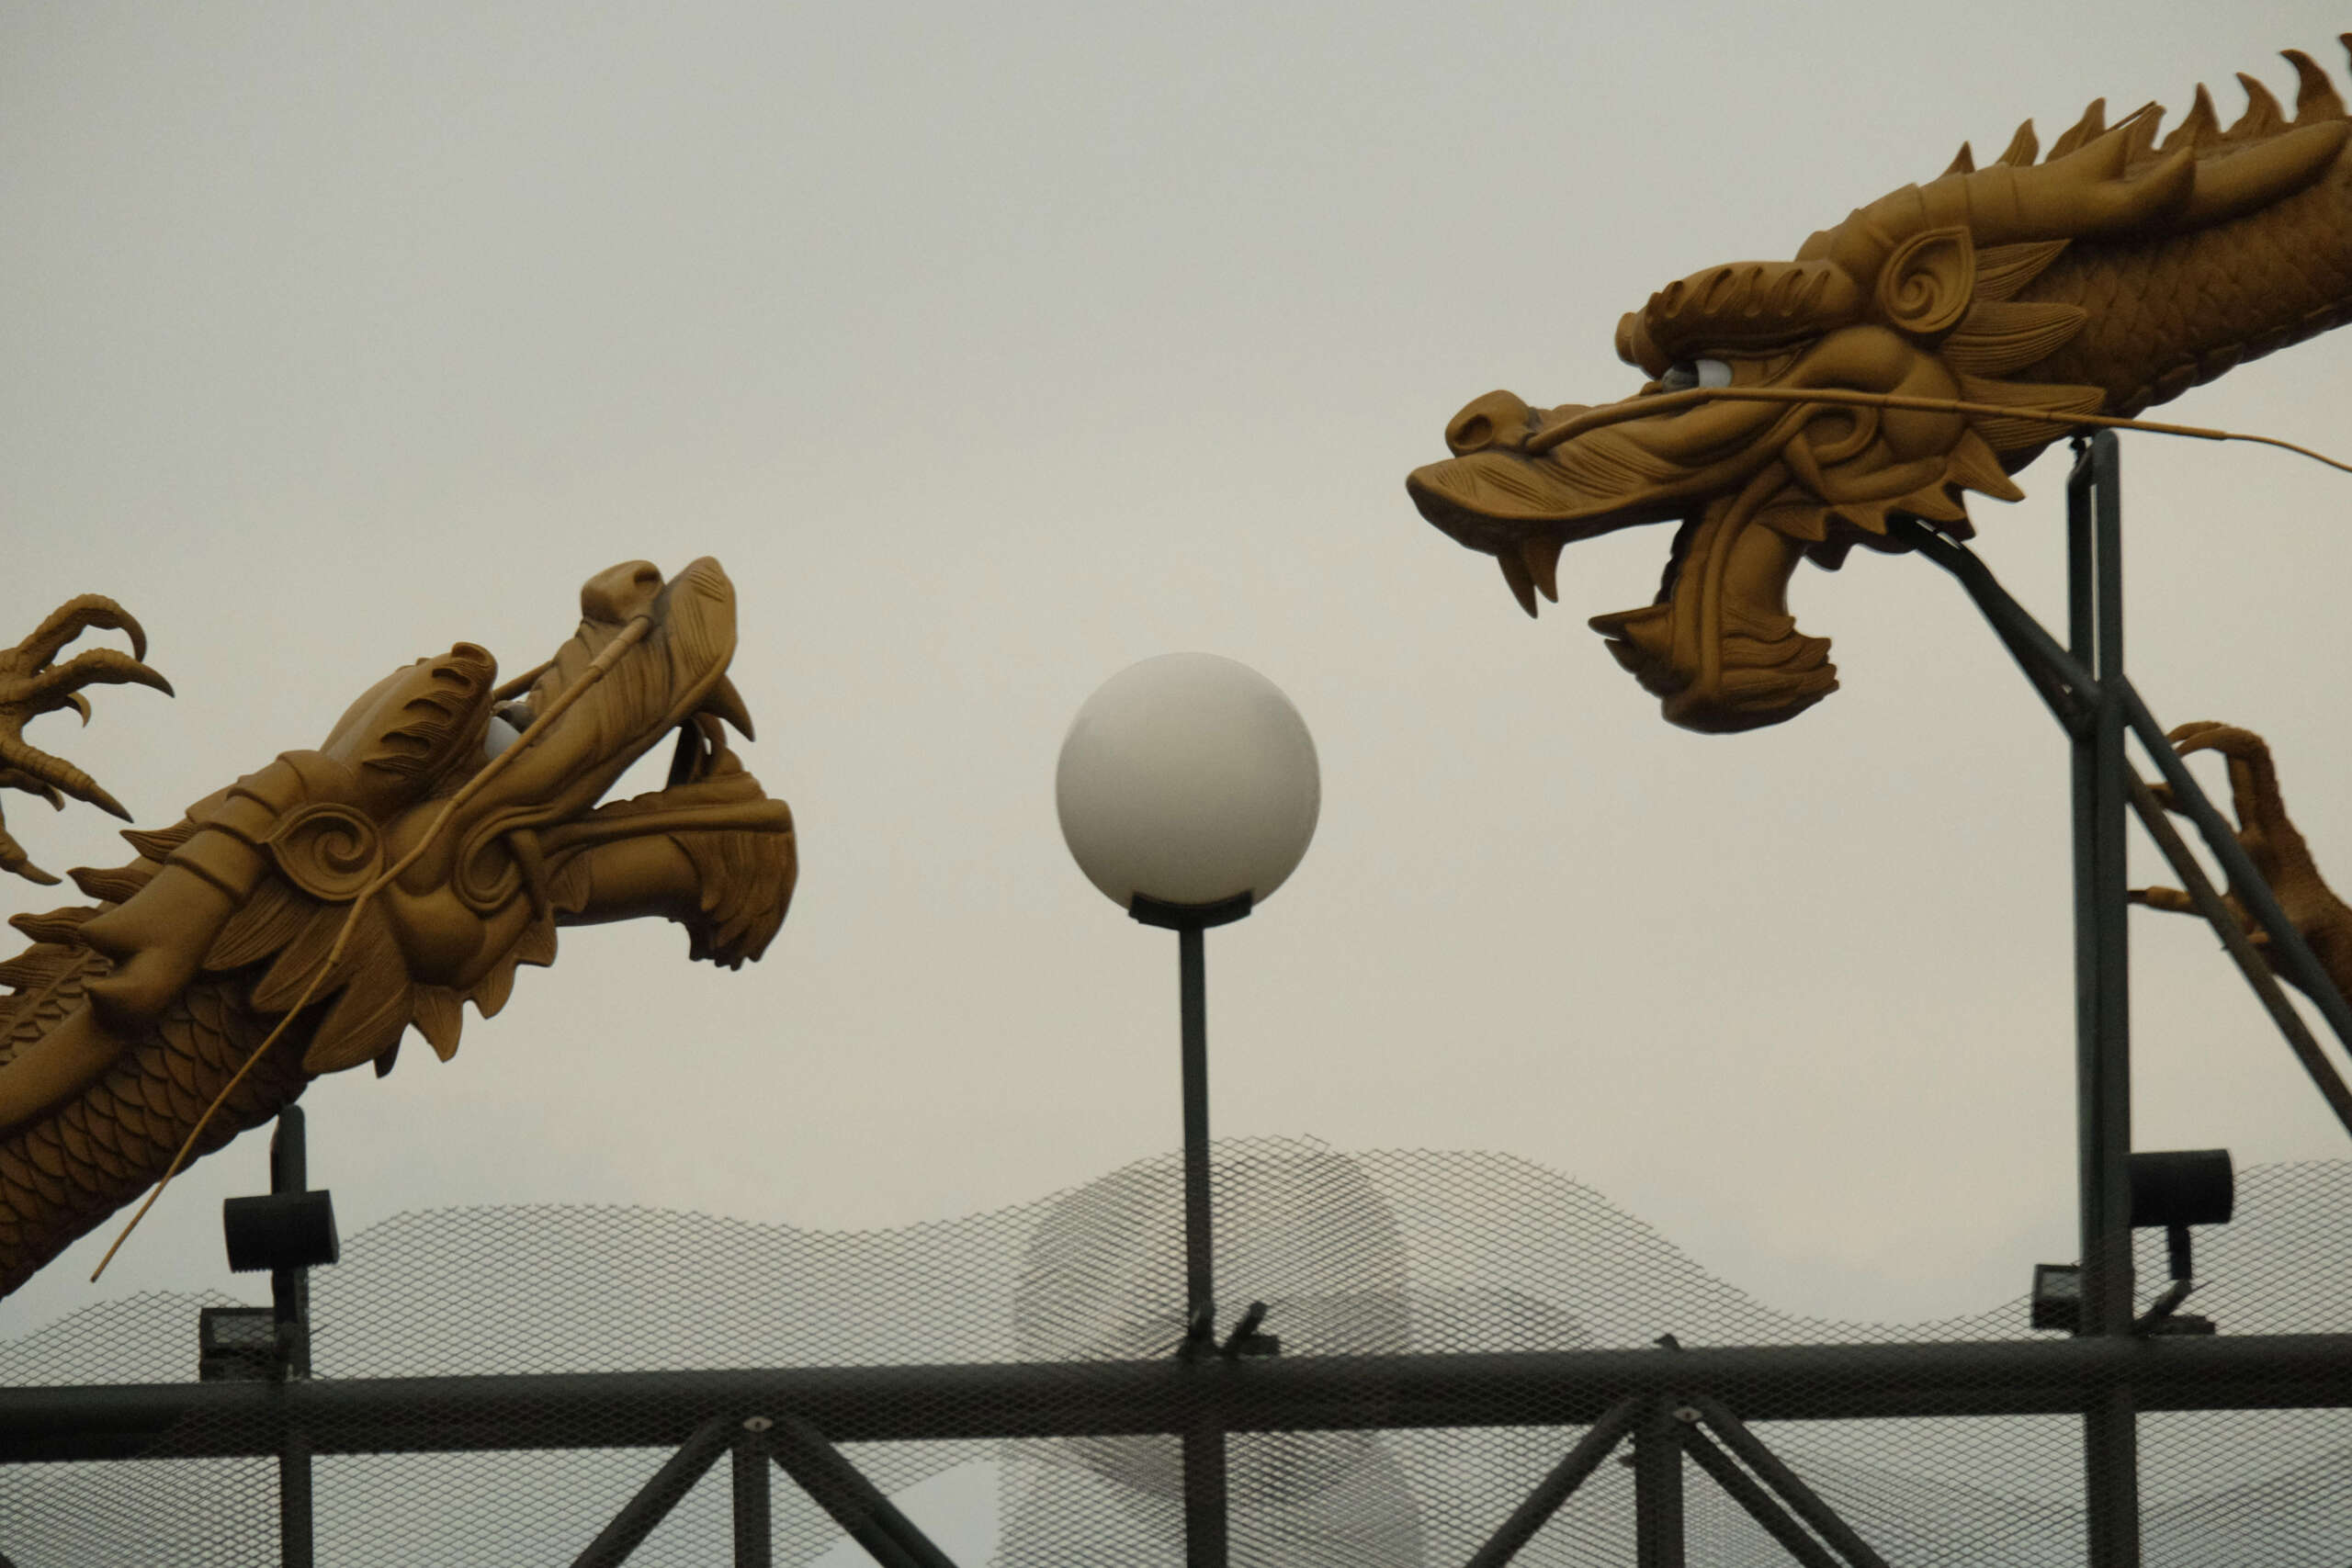 An art installation of a pearl between two dragons from Los Angeles's Chinatown.